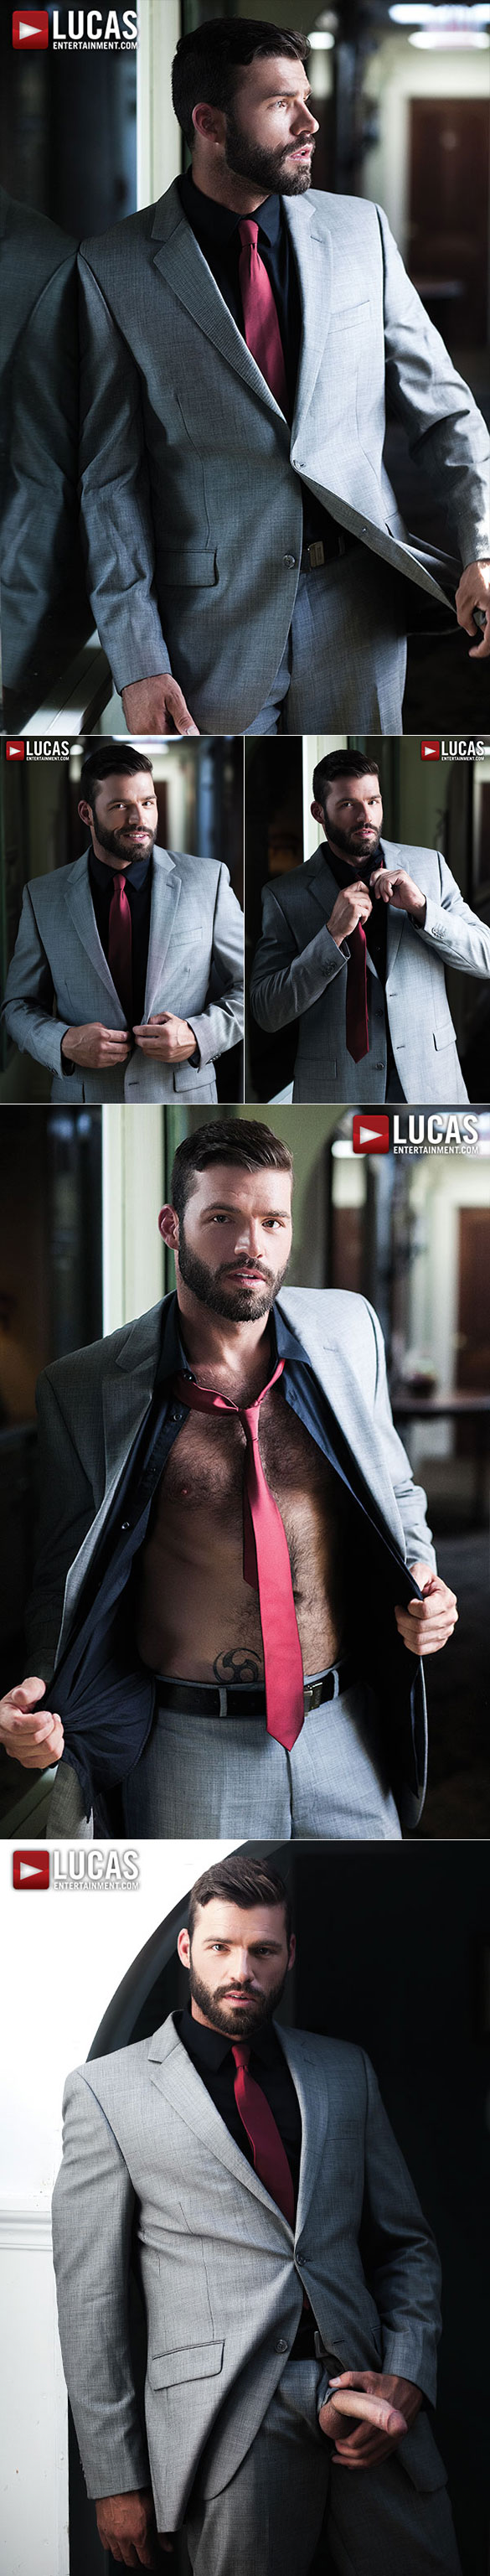 Lucas Entertainment: Xavier Jacobs and Sergeant Miles flip fuck raw in "Gentlemen 15: Suited For Sex"